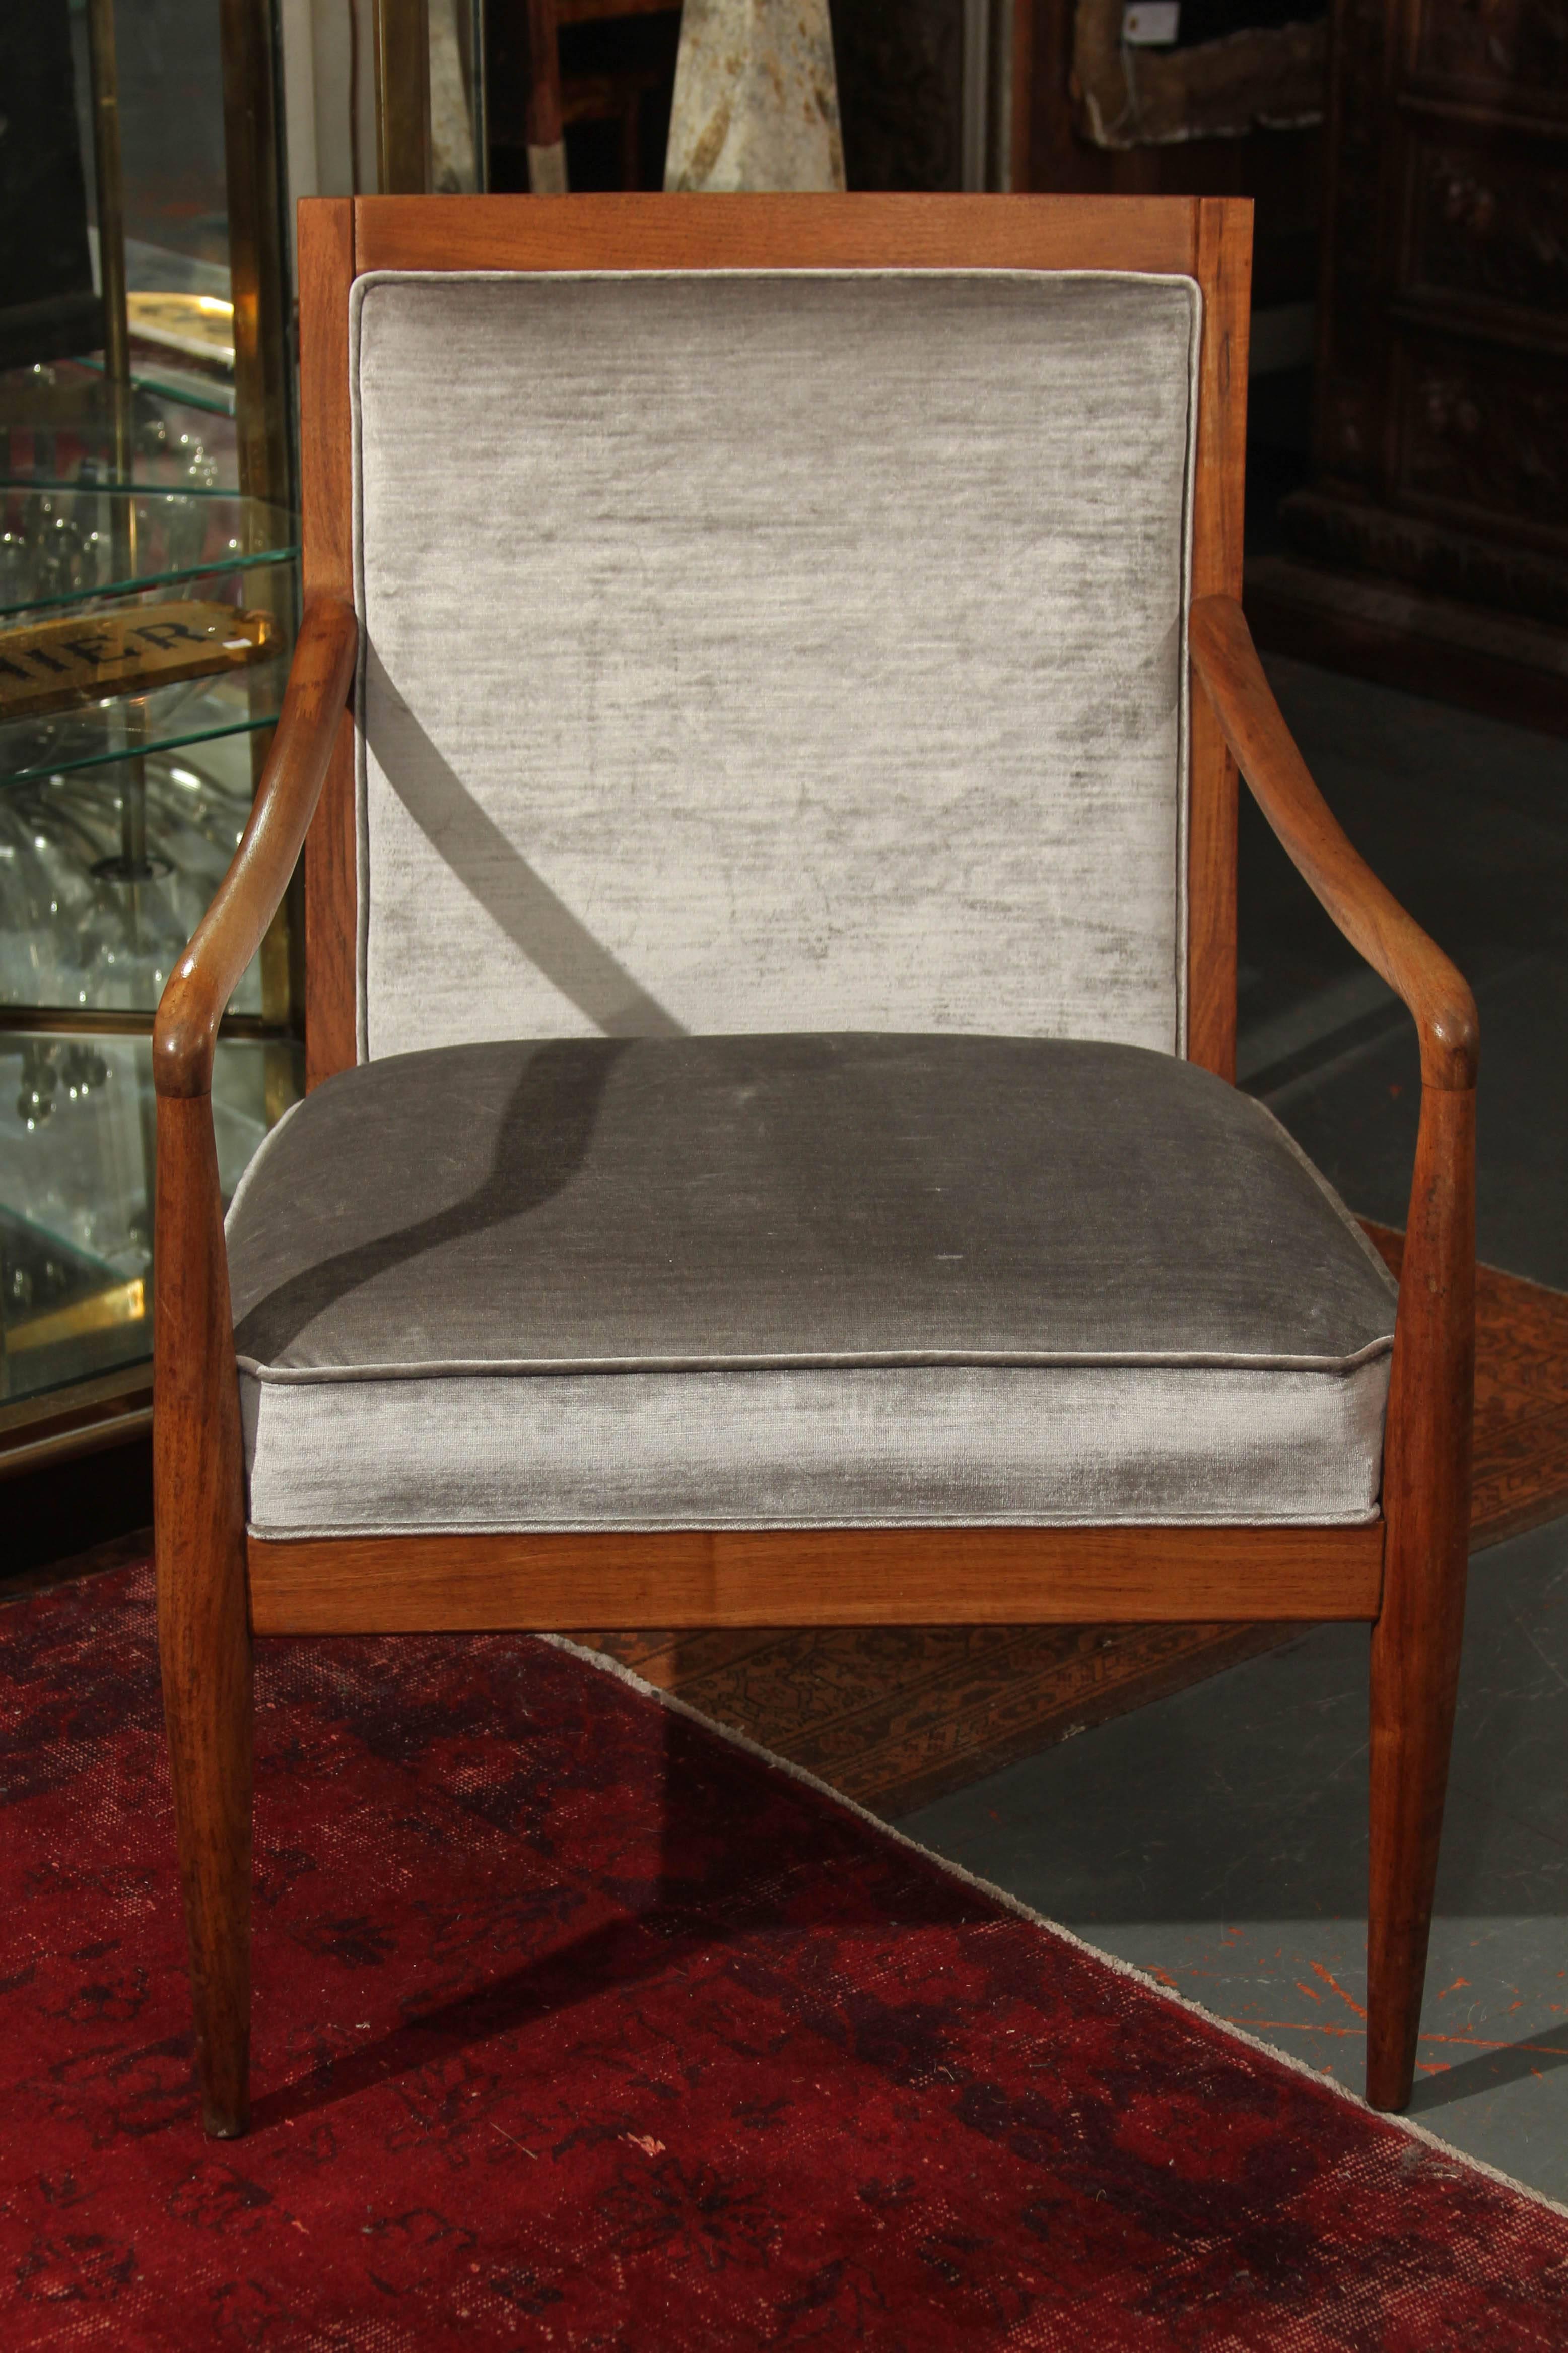 Midcentury wood frame chair newly updated in pearl gray silk velvet. Beautiful and comfortable side chair for any room in the house.